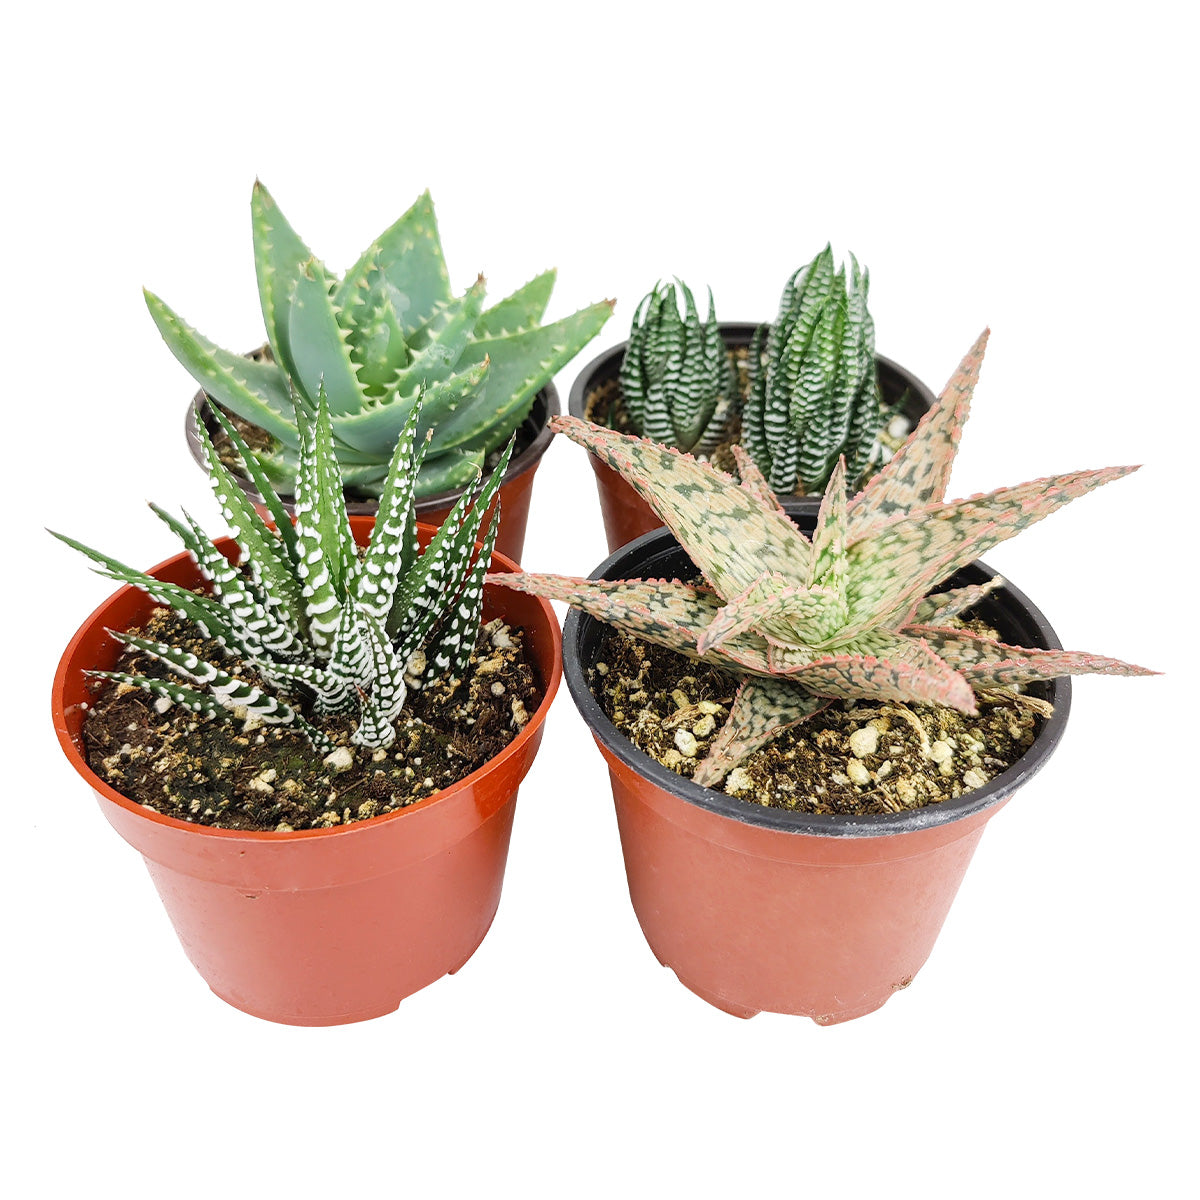 Live Haworthia Aloe Agave Gasteria Assorted Pack for sale, A Variety of Healthy Live Haworthia Aloe Agave Gasteria Succulent Plant, Colorful Haworthia Aloe Agave Gasteria Gift Ideas, How to care for Haworthia Aloe Agave Gasteria Succulent, How to grow Haworthia Aloe Agave Gasteria Succulent Indoor, Haworthia Aloe Agave Gasteria, buy succulents online, succulent shop, succulent store, Haworthia Aloe Agave Gasteria plant, indoor succulents